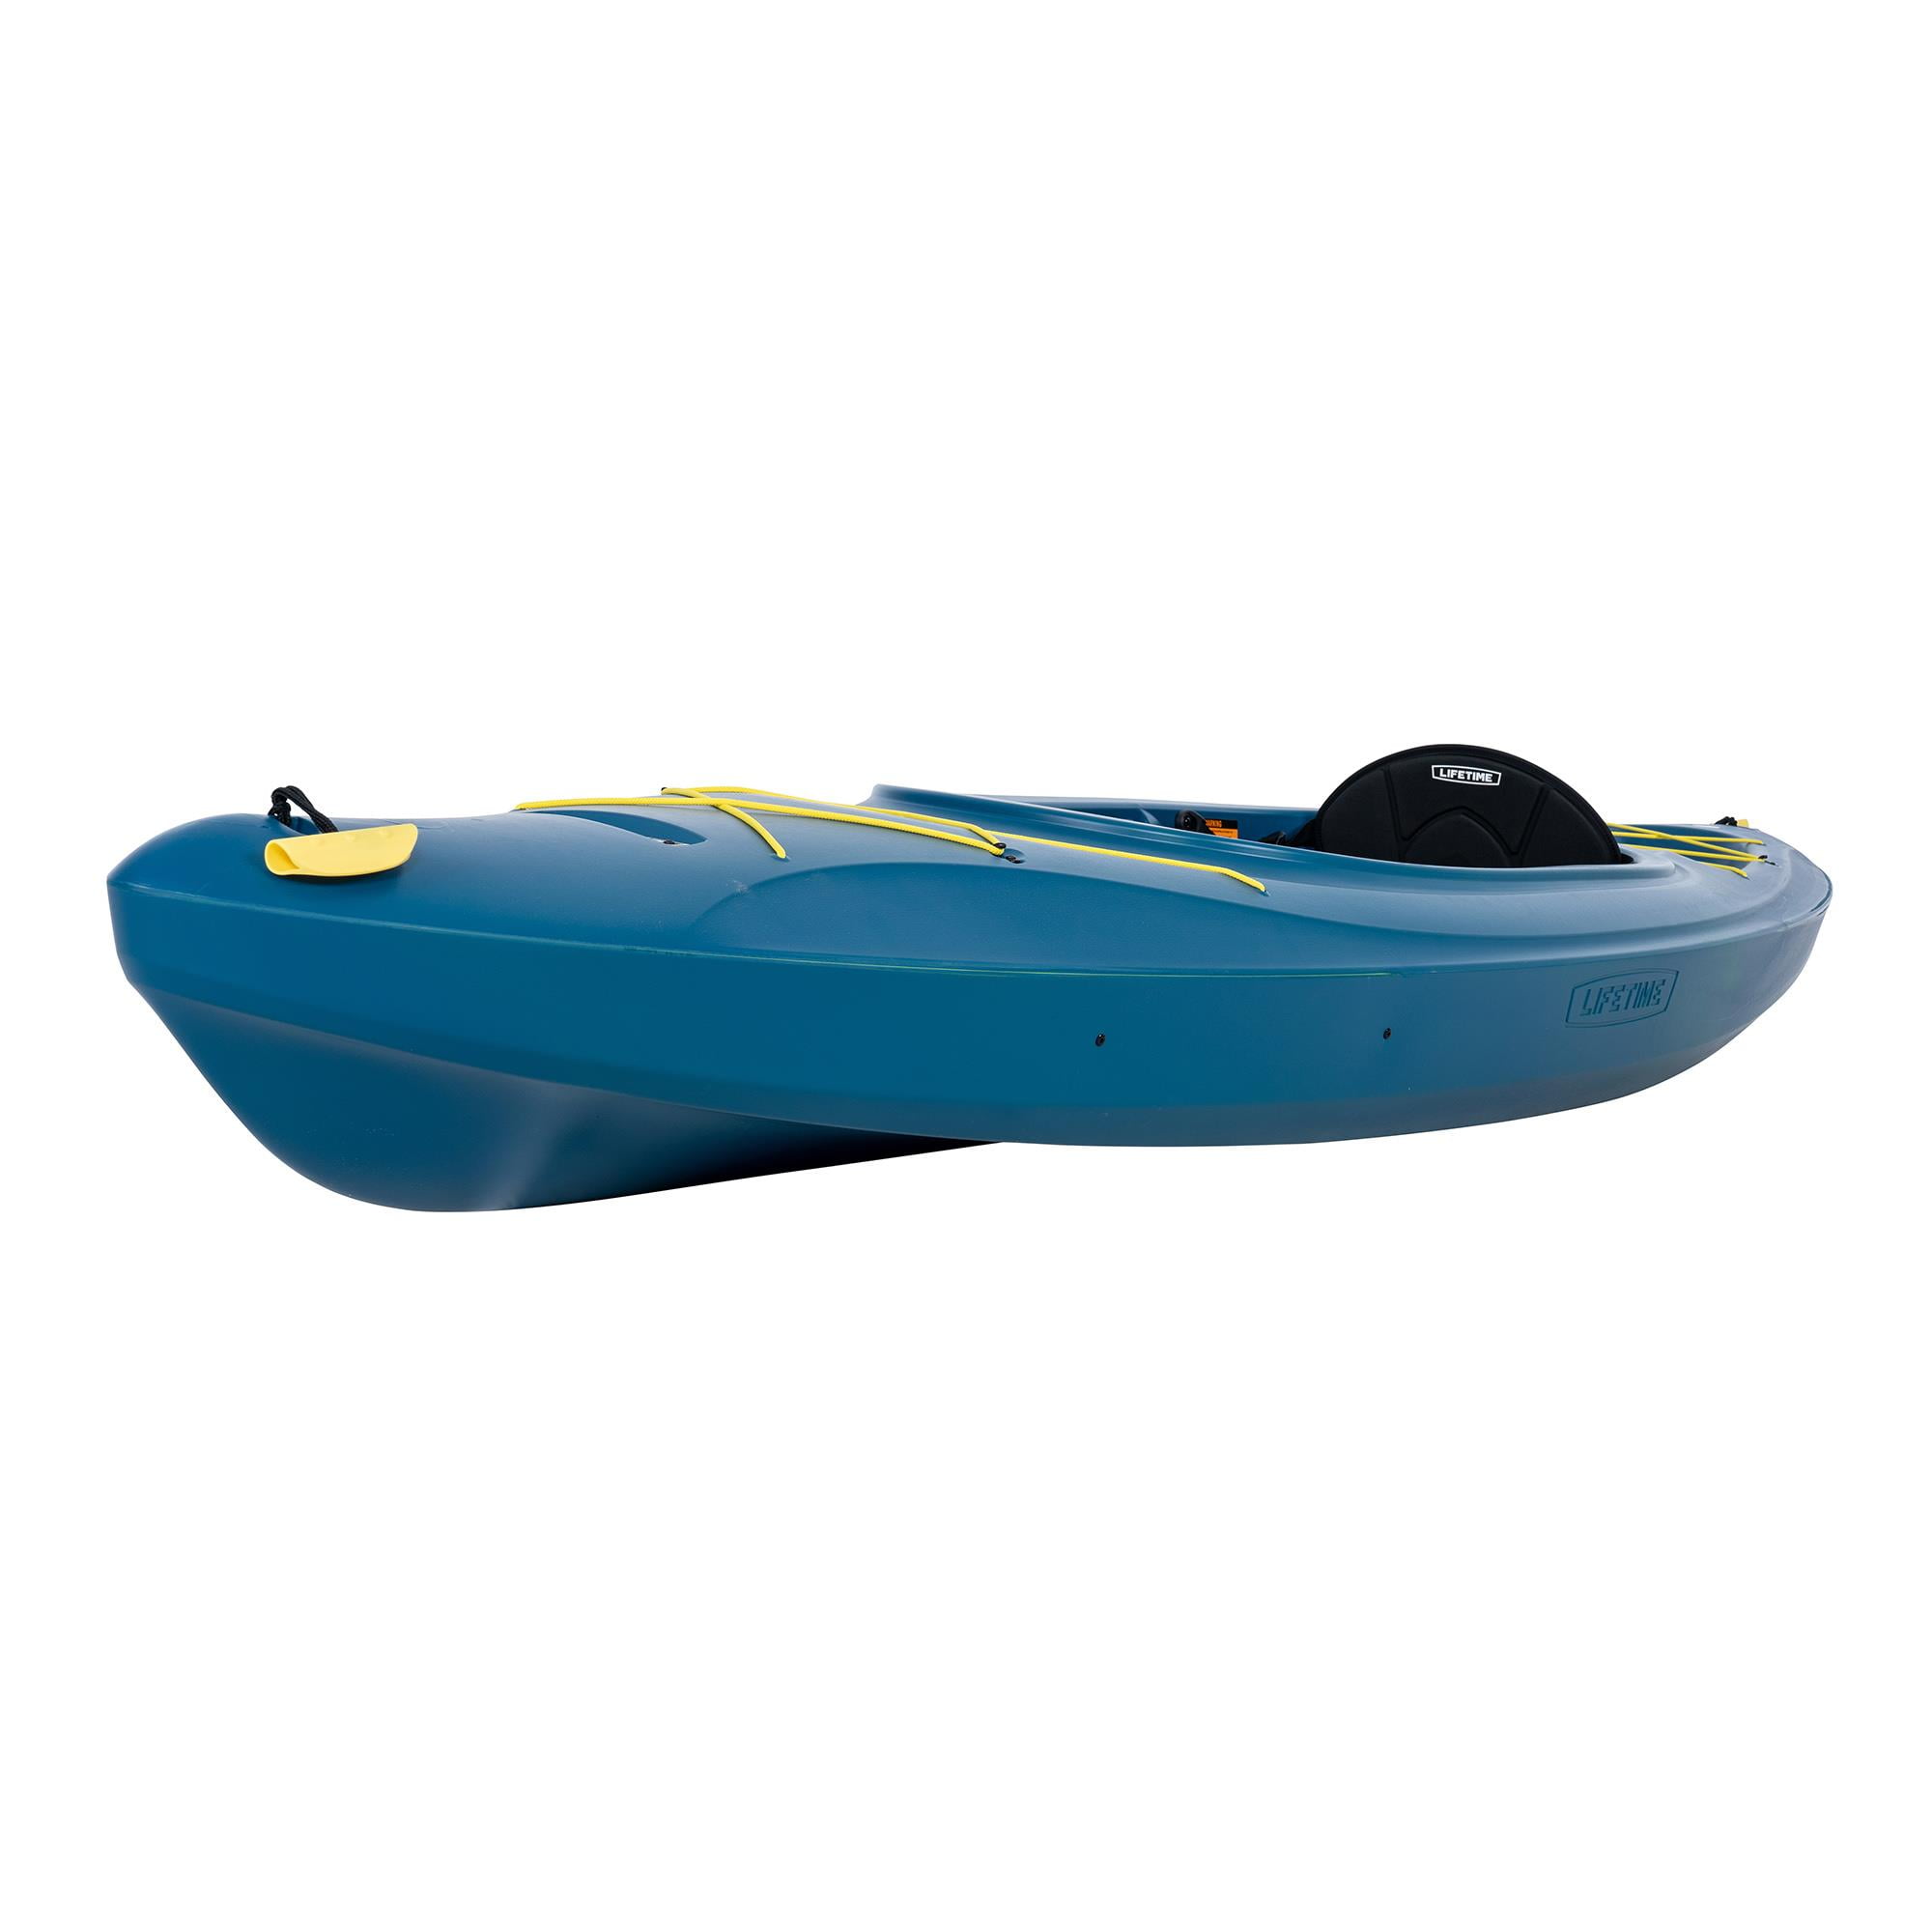 LSF Best Selling 10ft Sit on Top Fishing Kayak with Rudder System